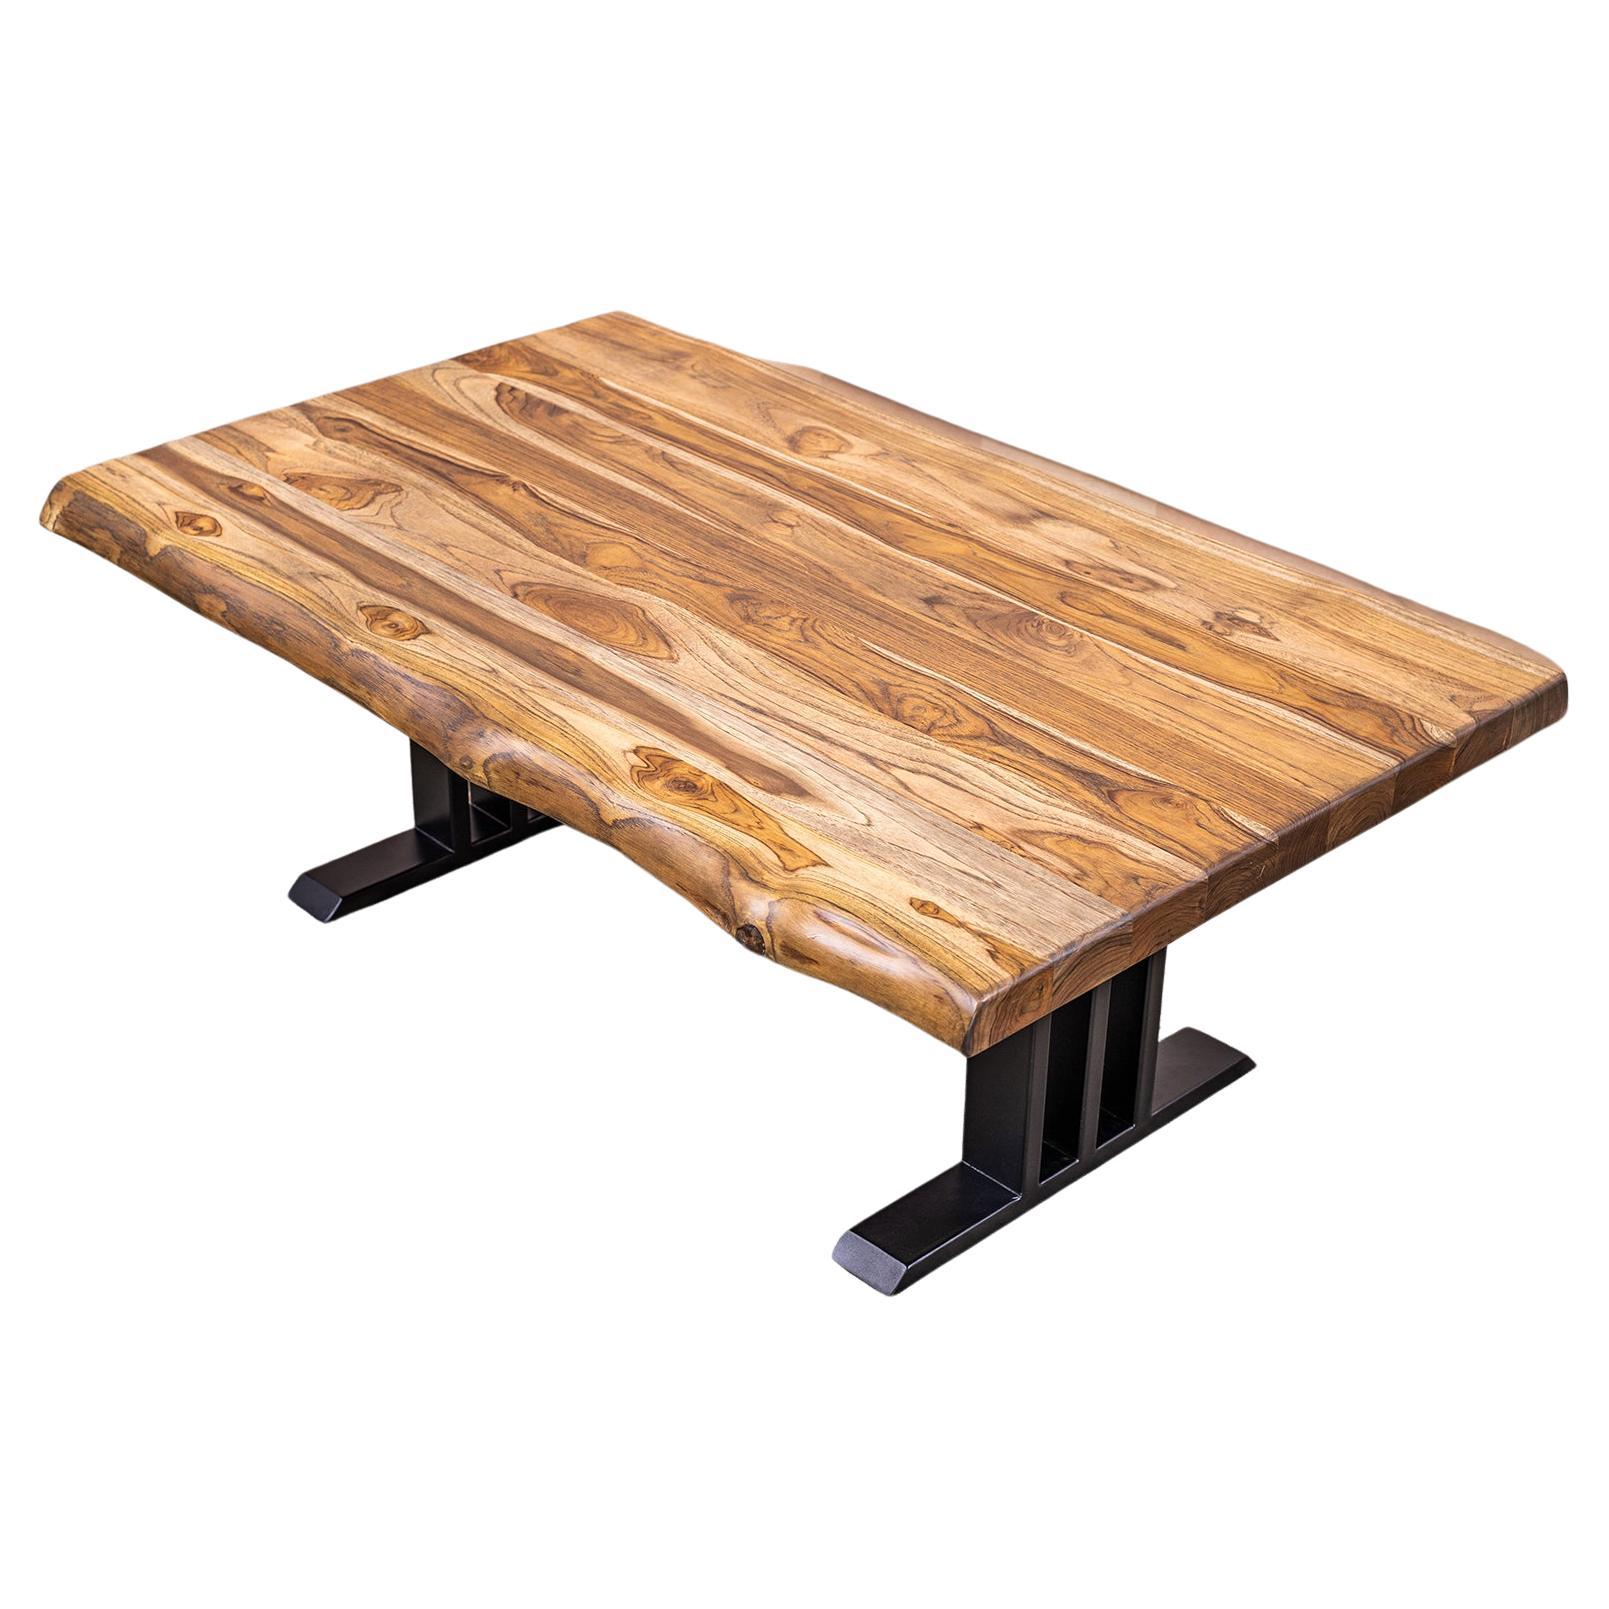 Handcrafted Solid Teak Live Edge Coffee Table with Metal Legs